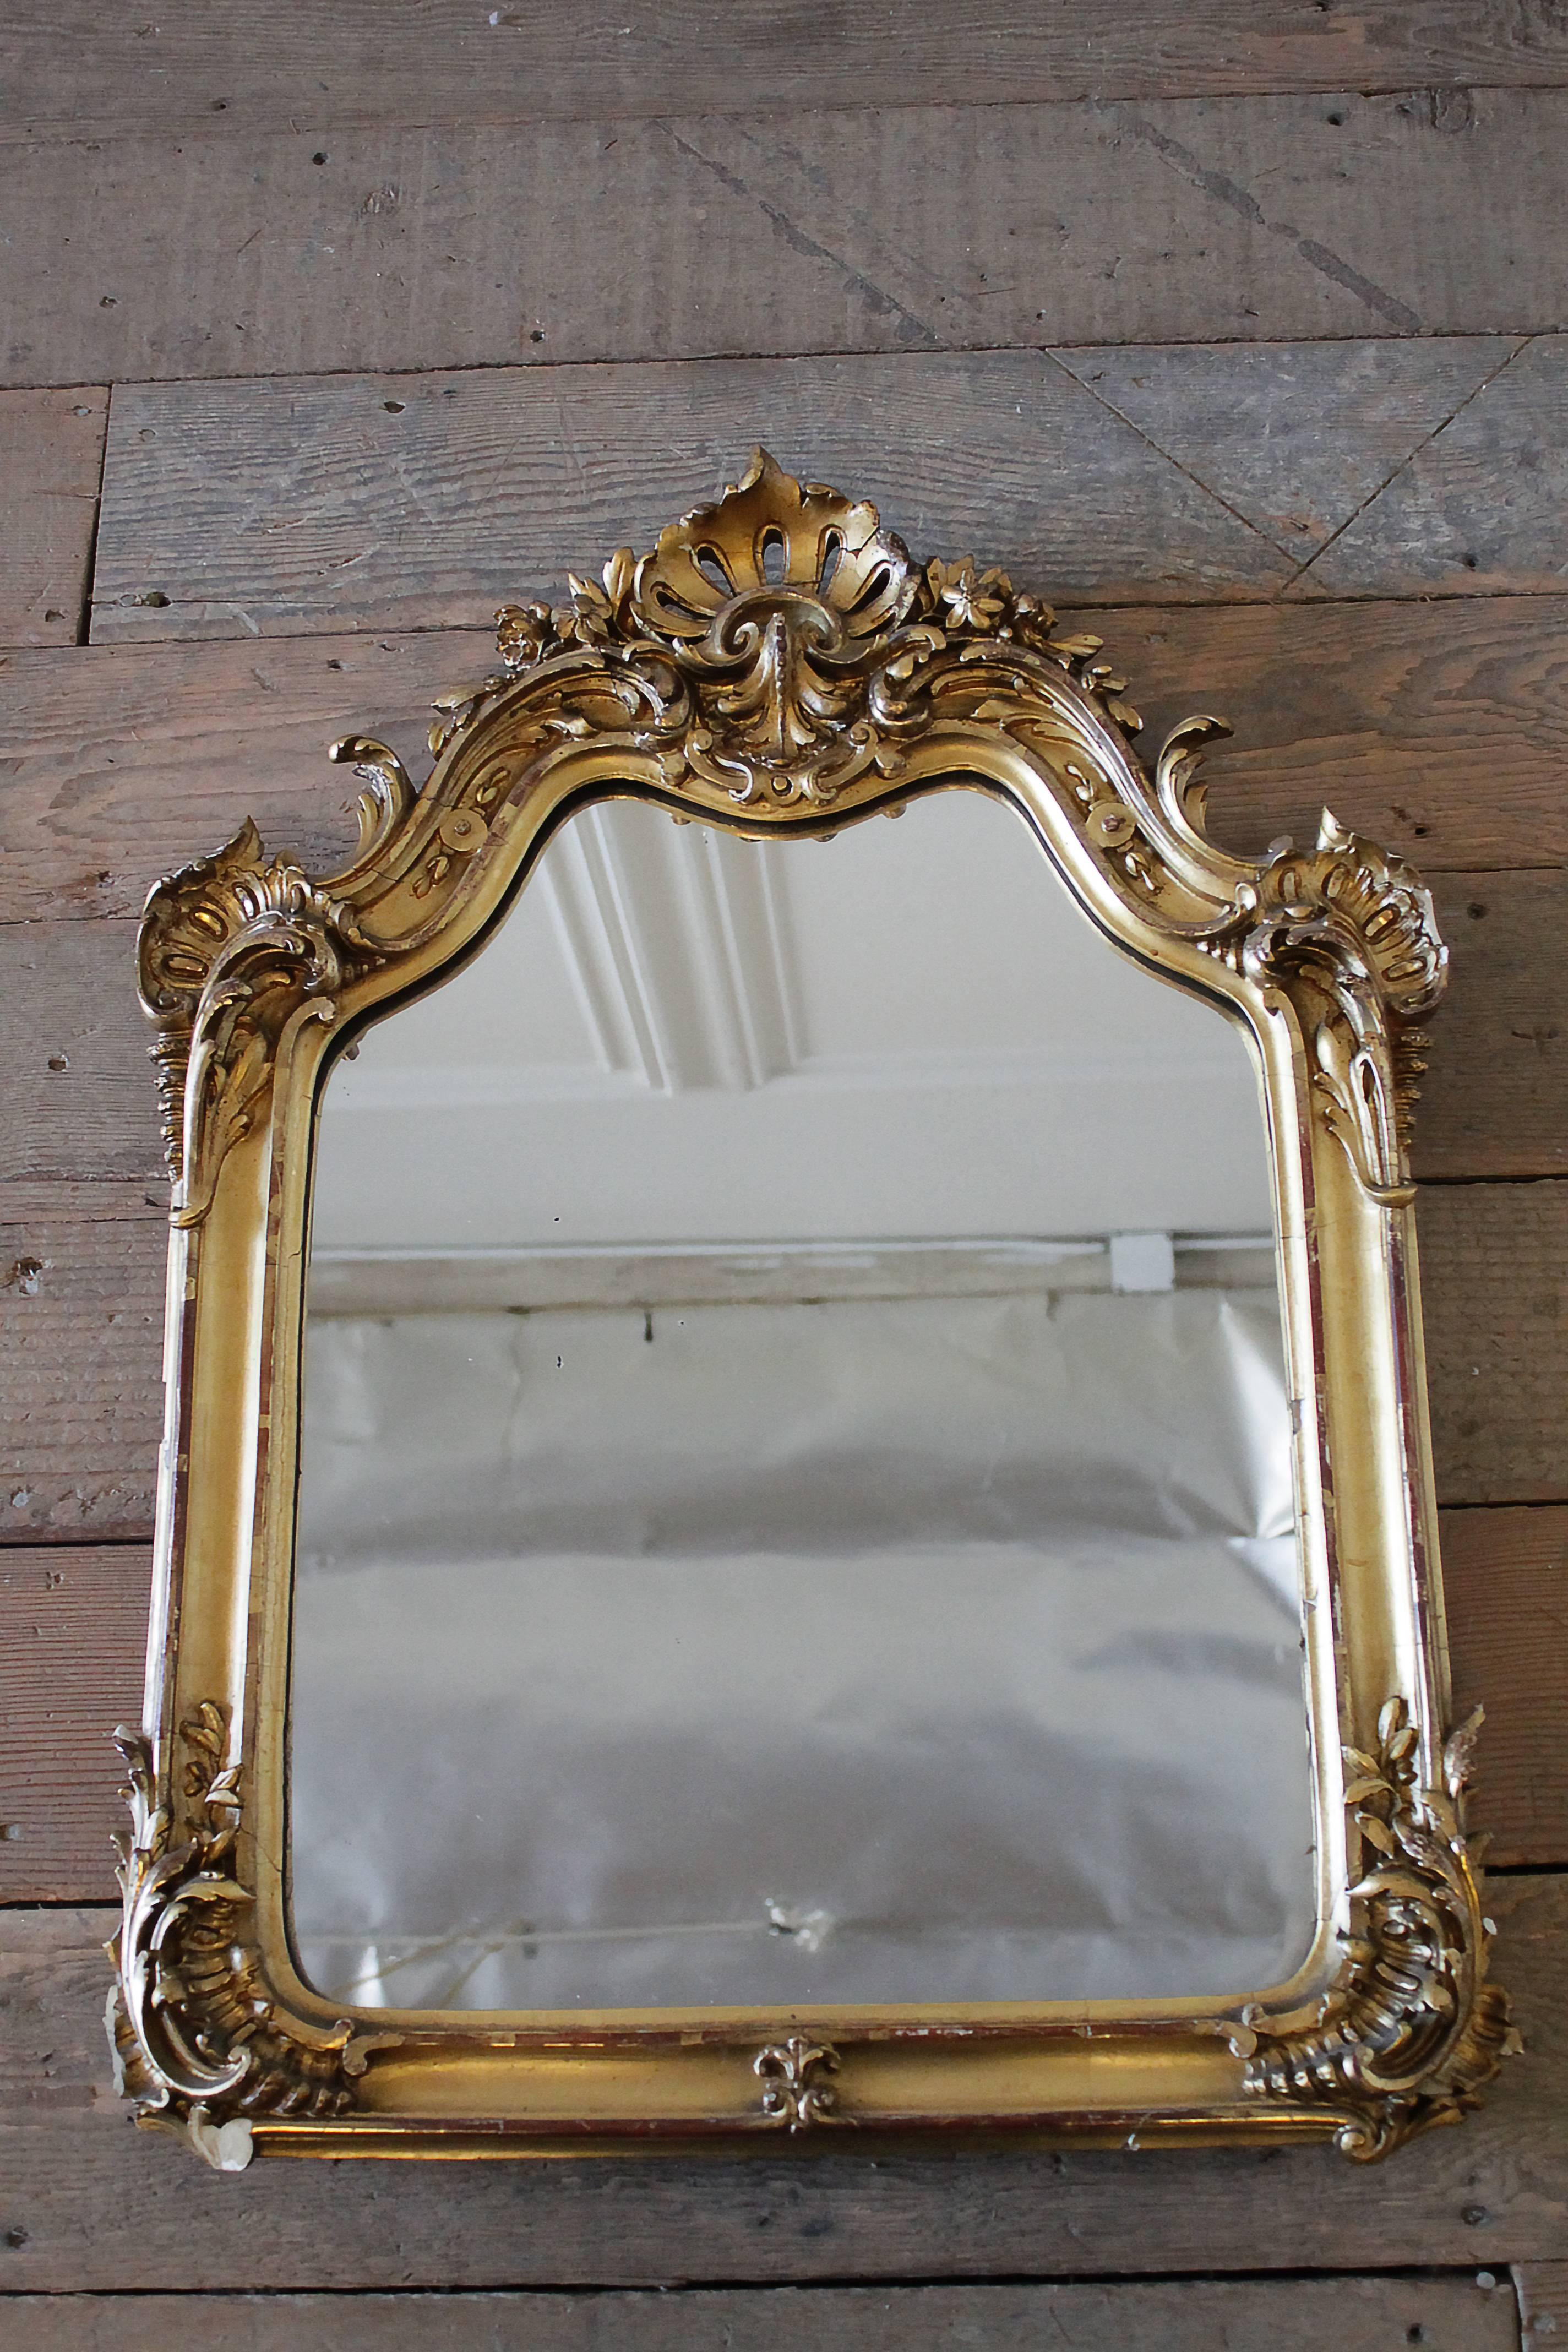 20th century carved Louis XV style giltwood mirror.
Measures: 22.5